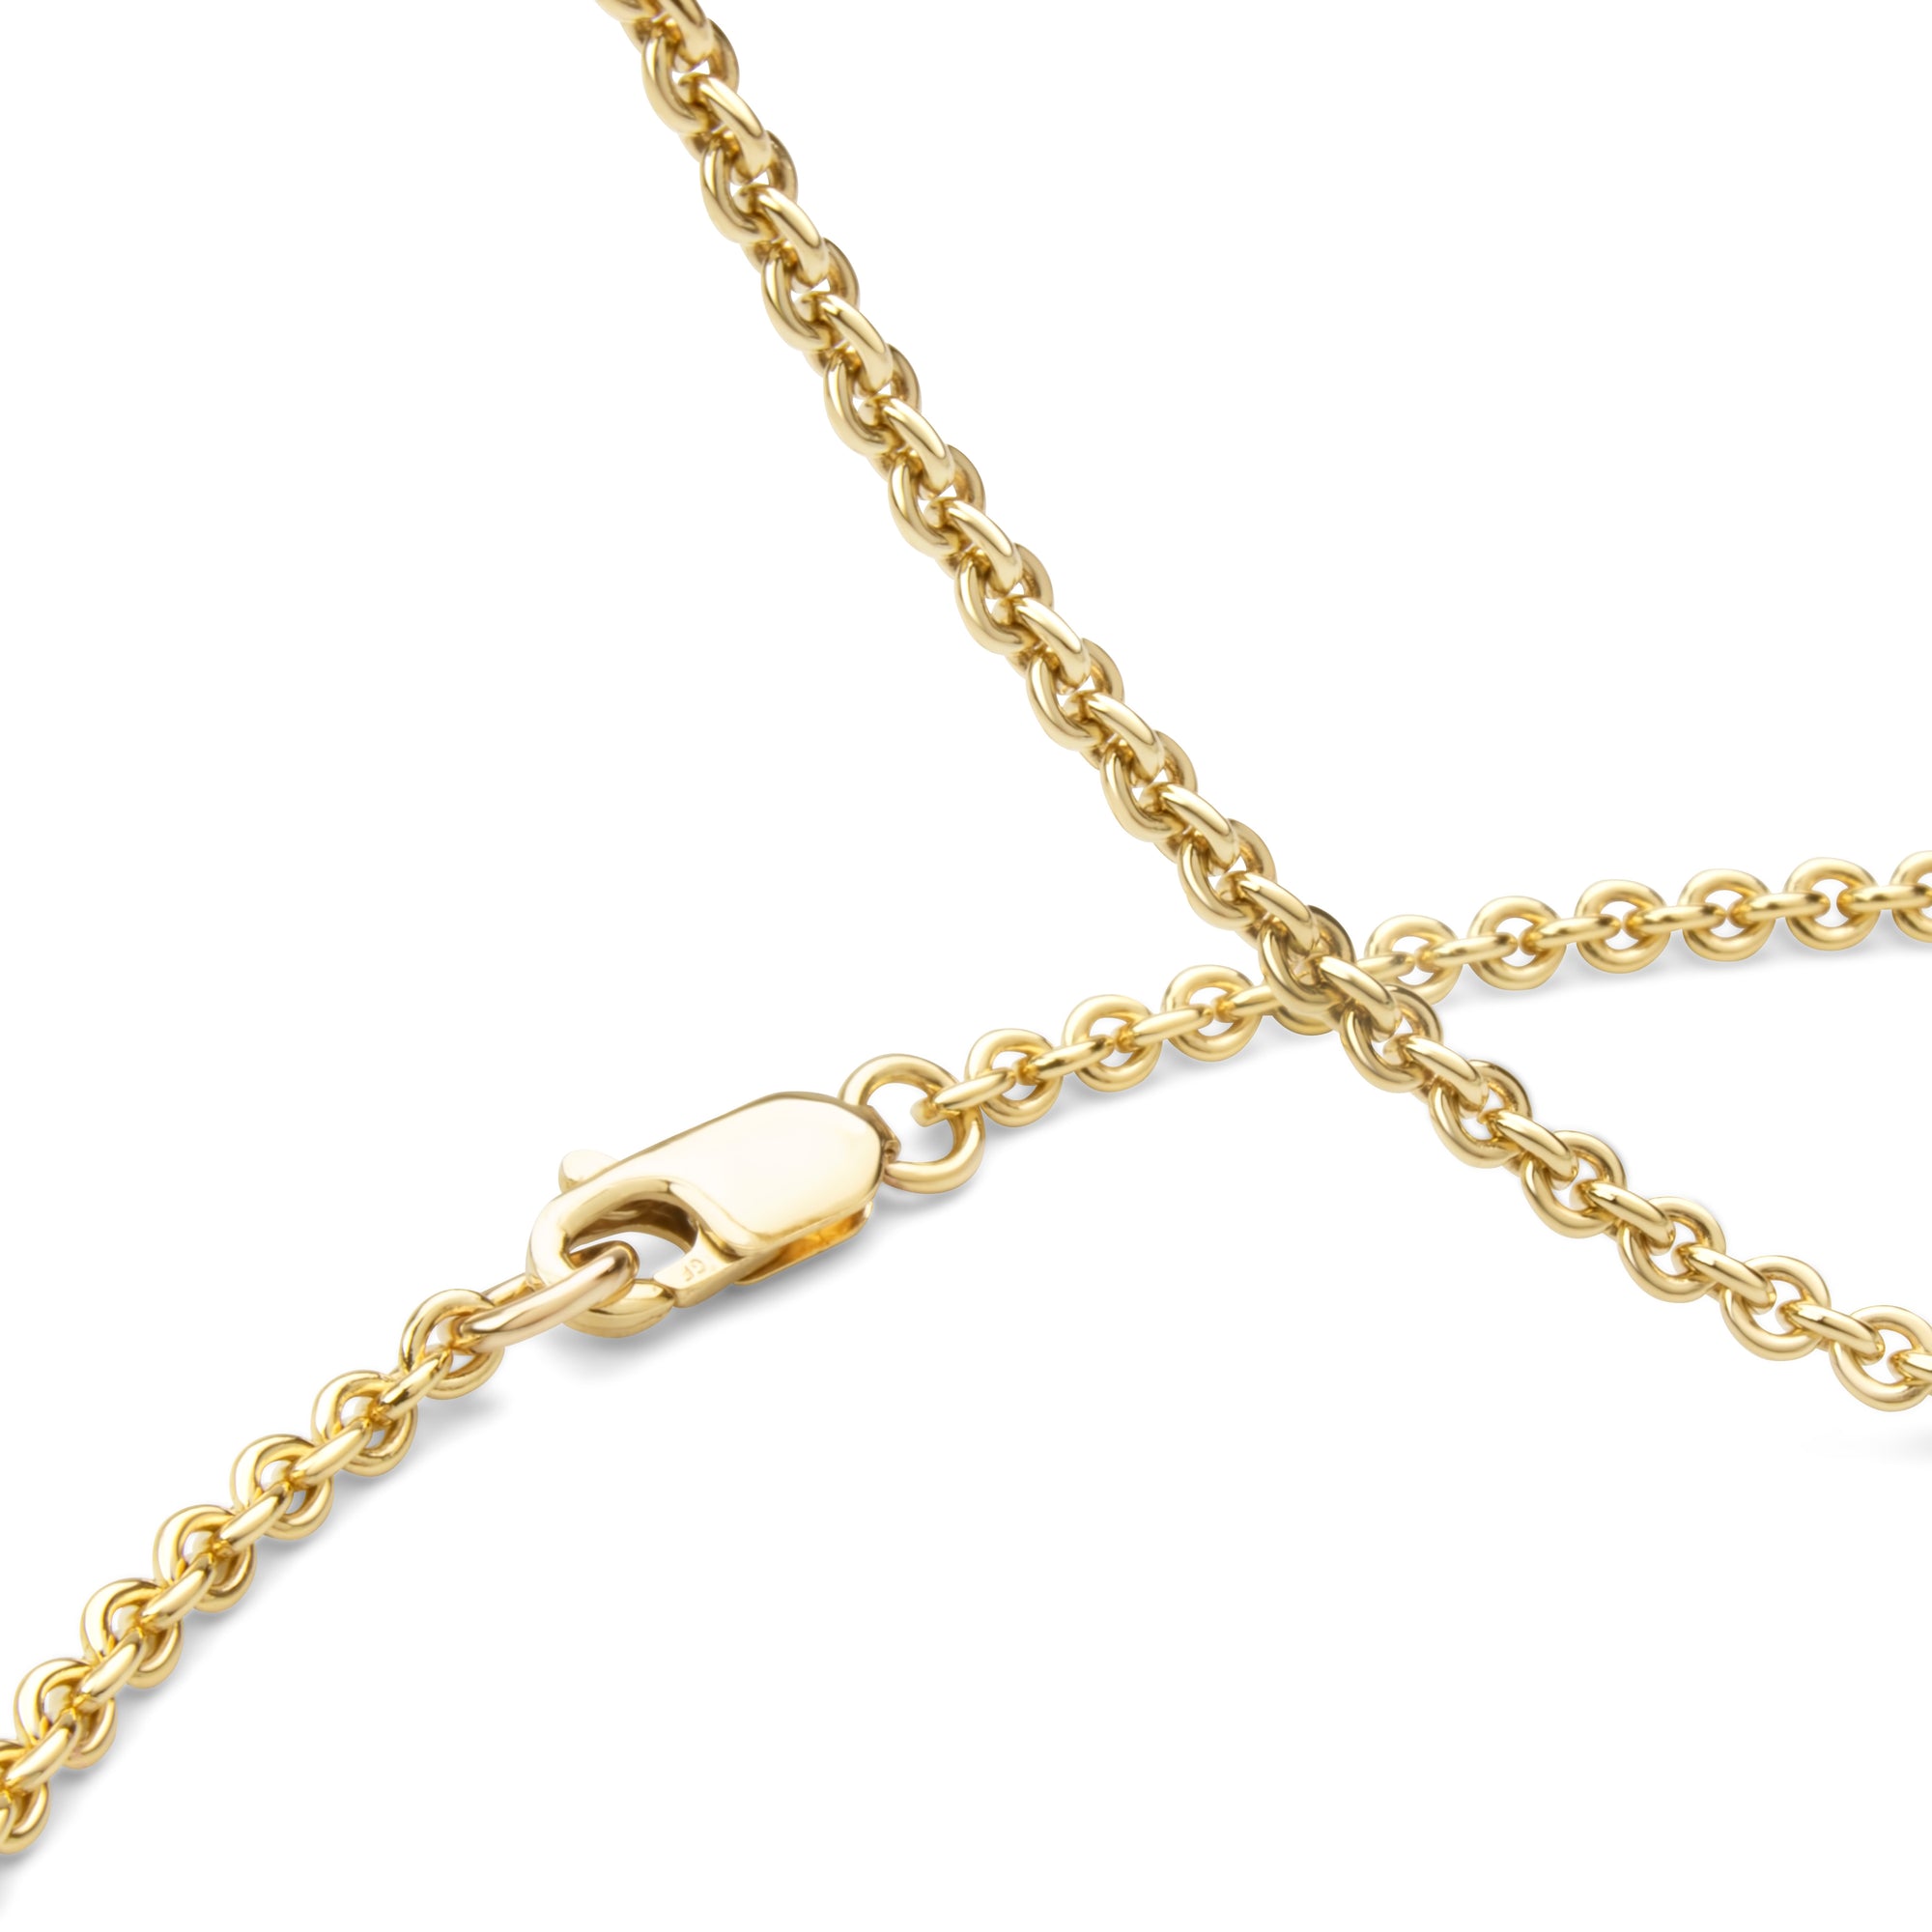 2.7mm Gold-Filled Cable Chain